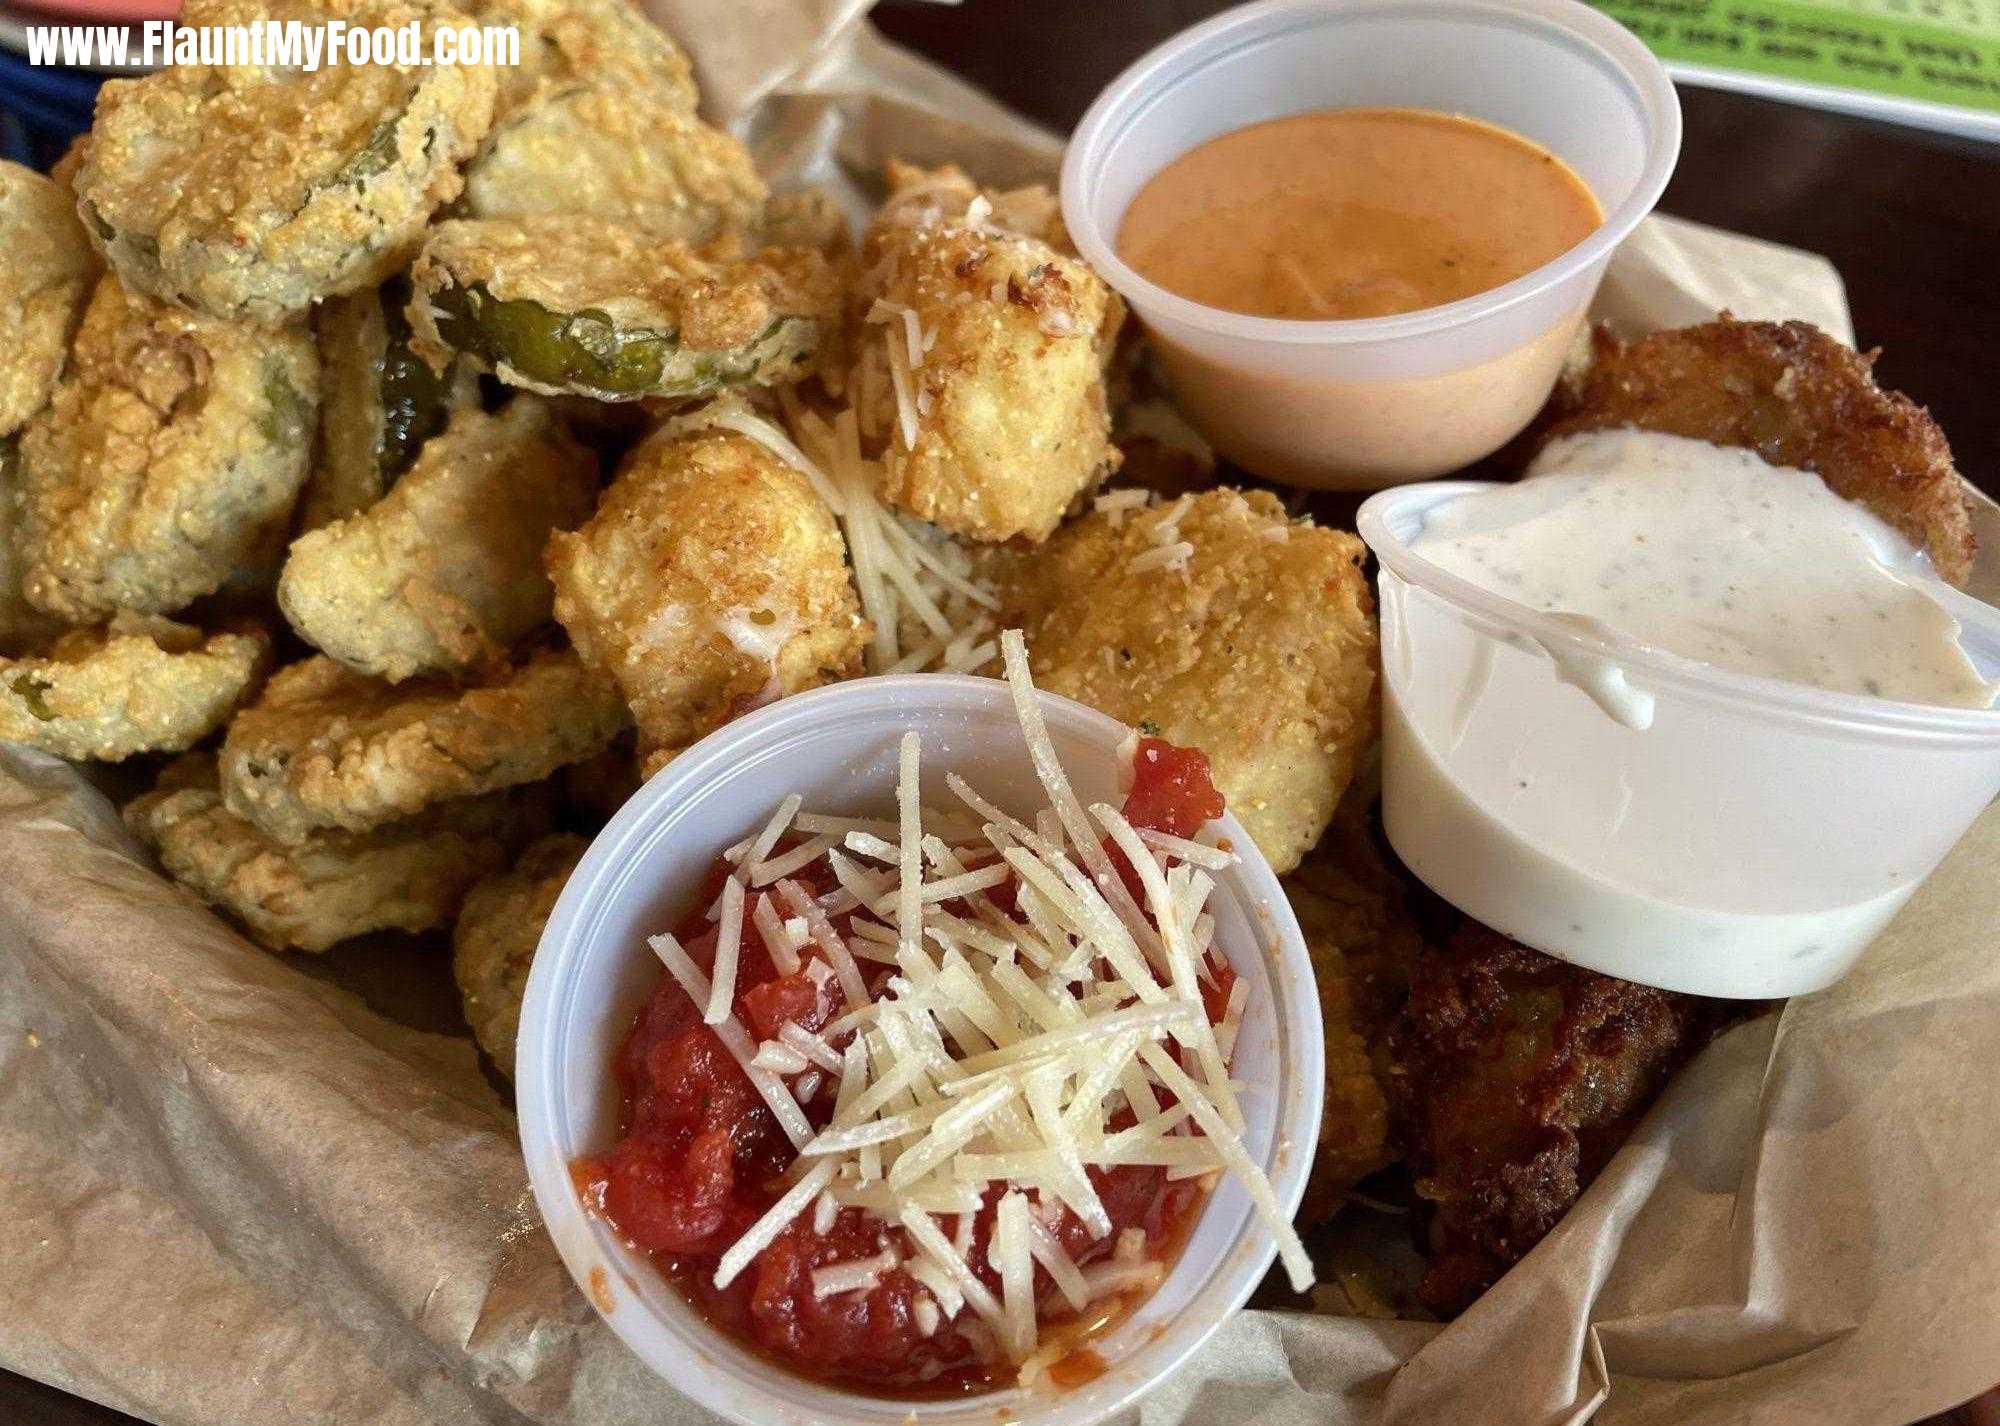 Border Burger in Manitou Springs ColoradoCOMBO PLATTER Hand-battered and golden brown fried pickles, breaded mozzarella, and cannon balls. Served with ranch, spicy aioli and marinara sauce.